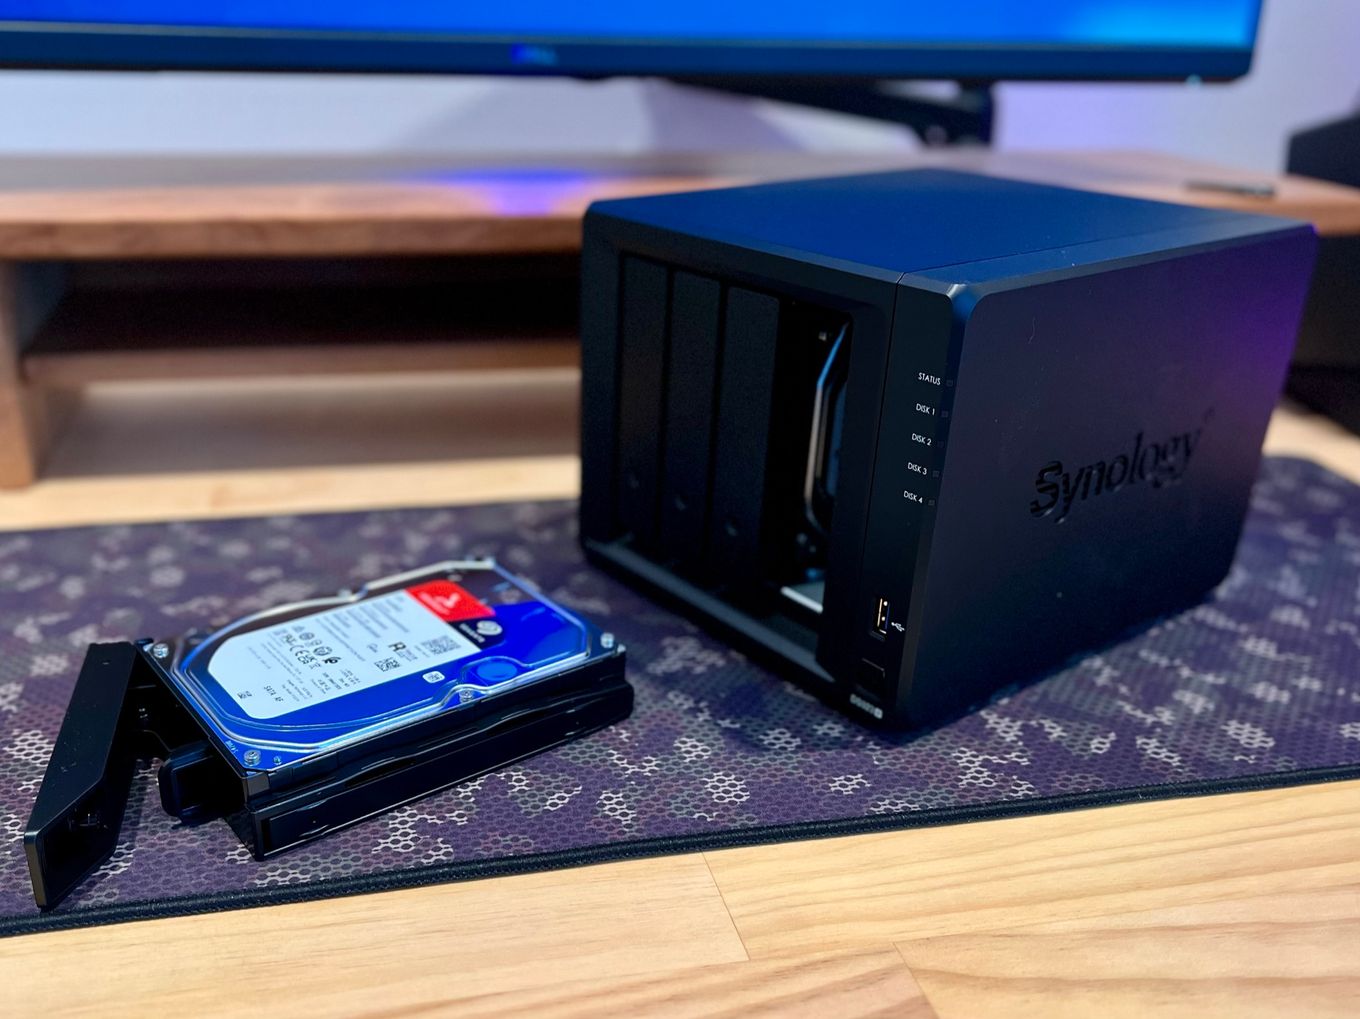 A photo of a Synology DS923+ NAS device sitting on a computer desk with a 8TB harddrive about to be installed.